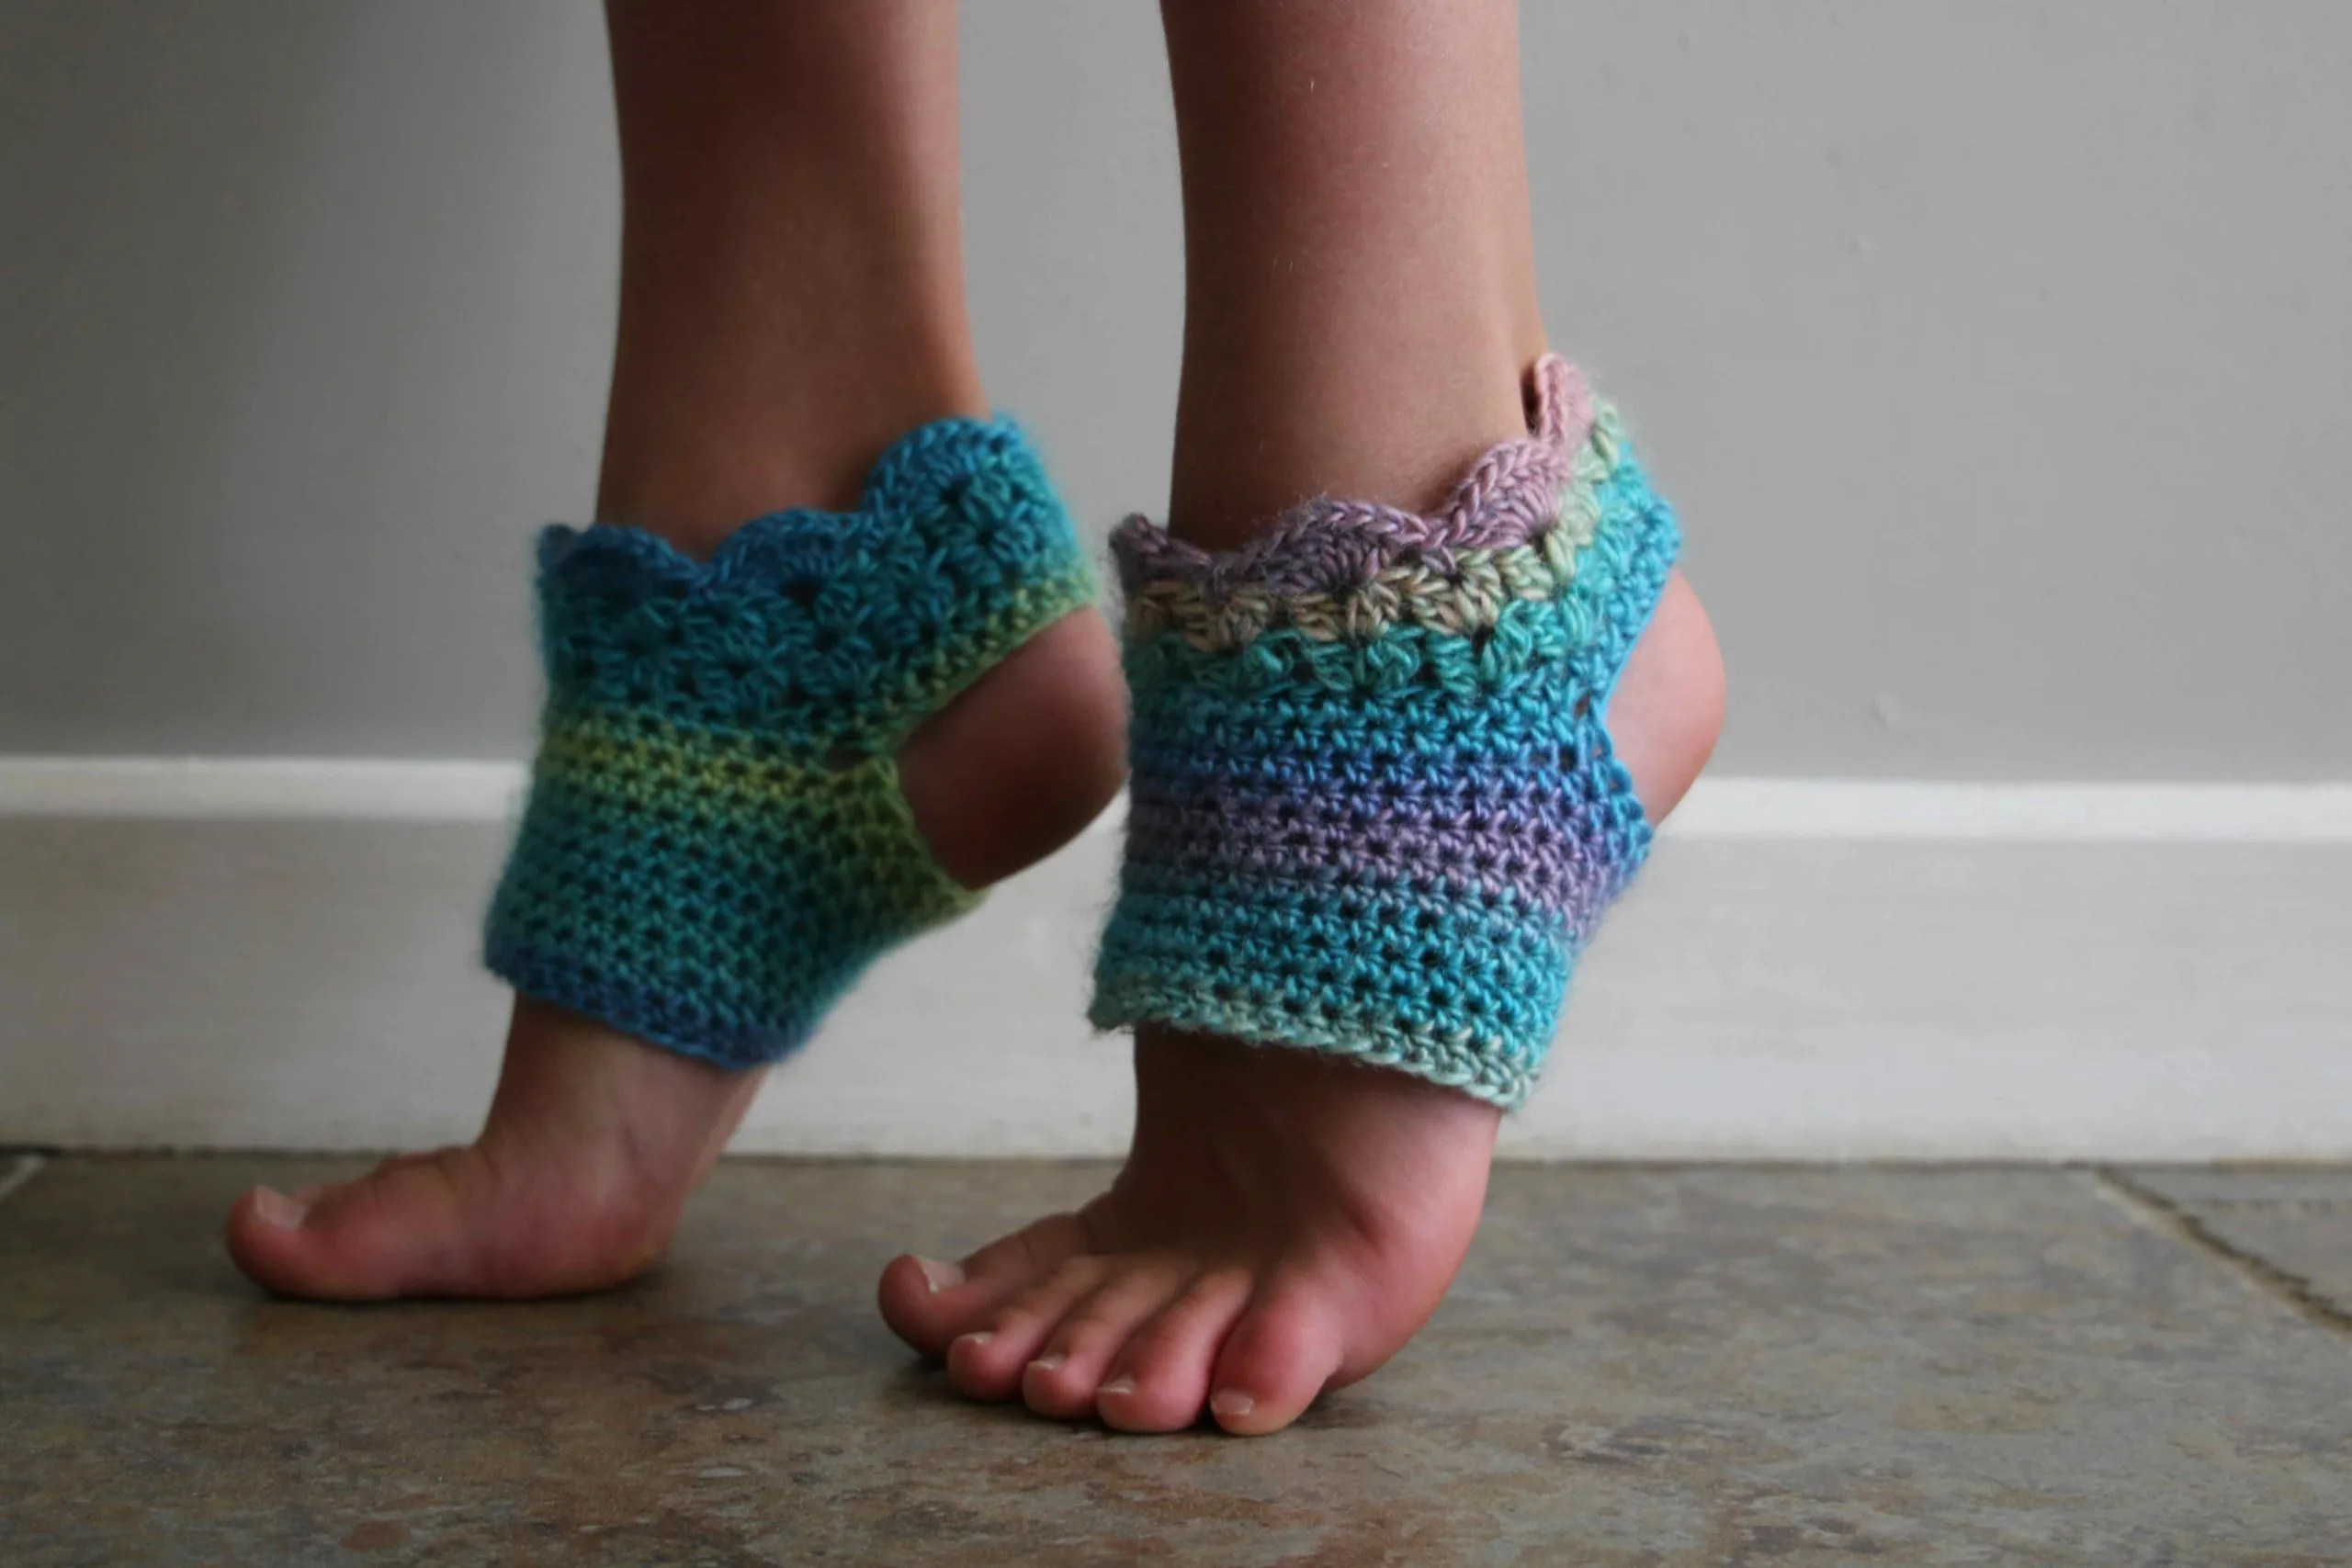 Crochet Yoga socks - free pattern - off the hook for you